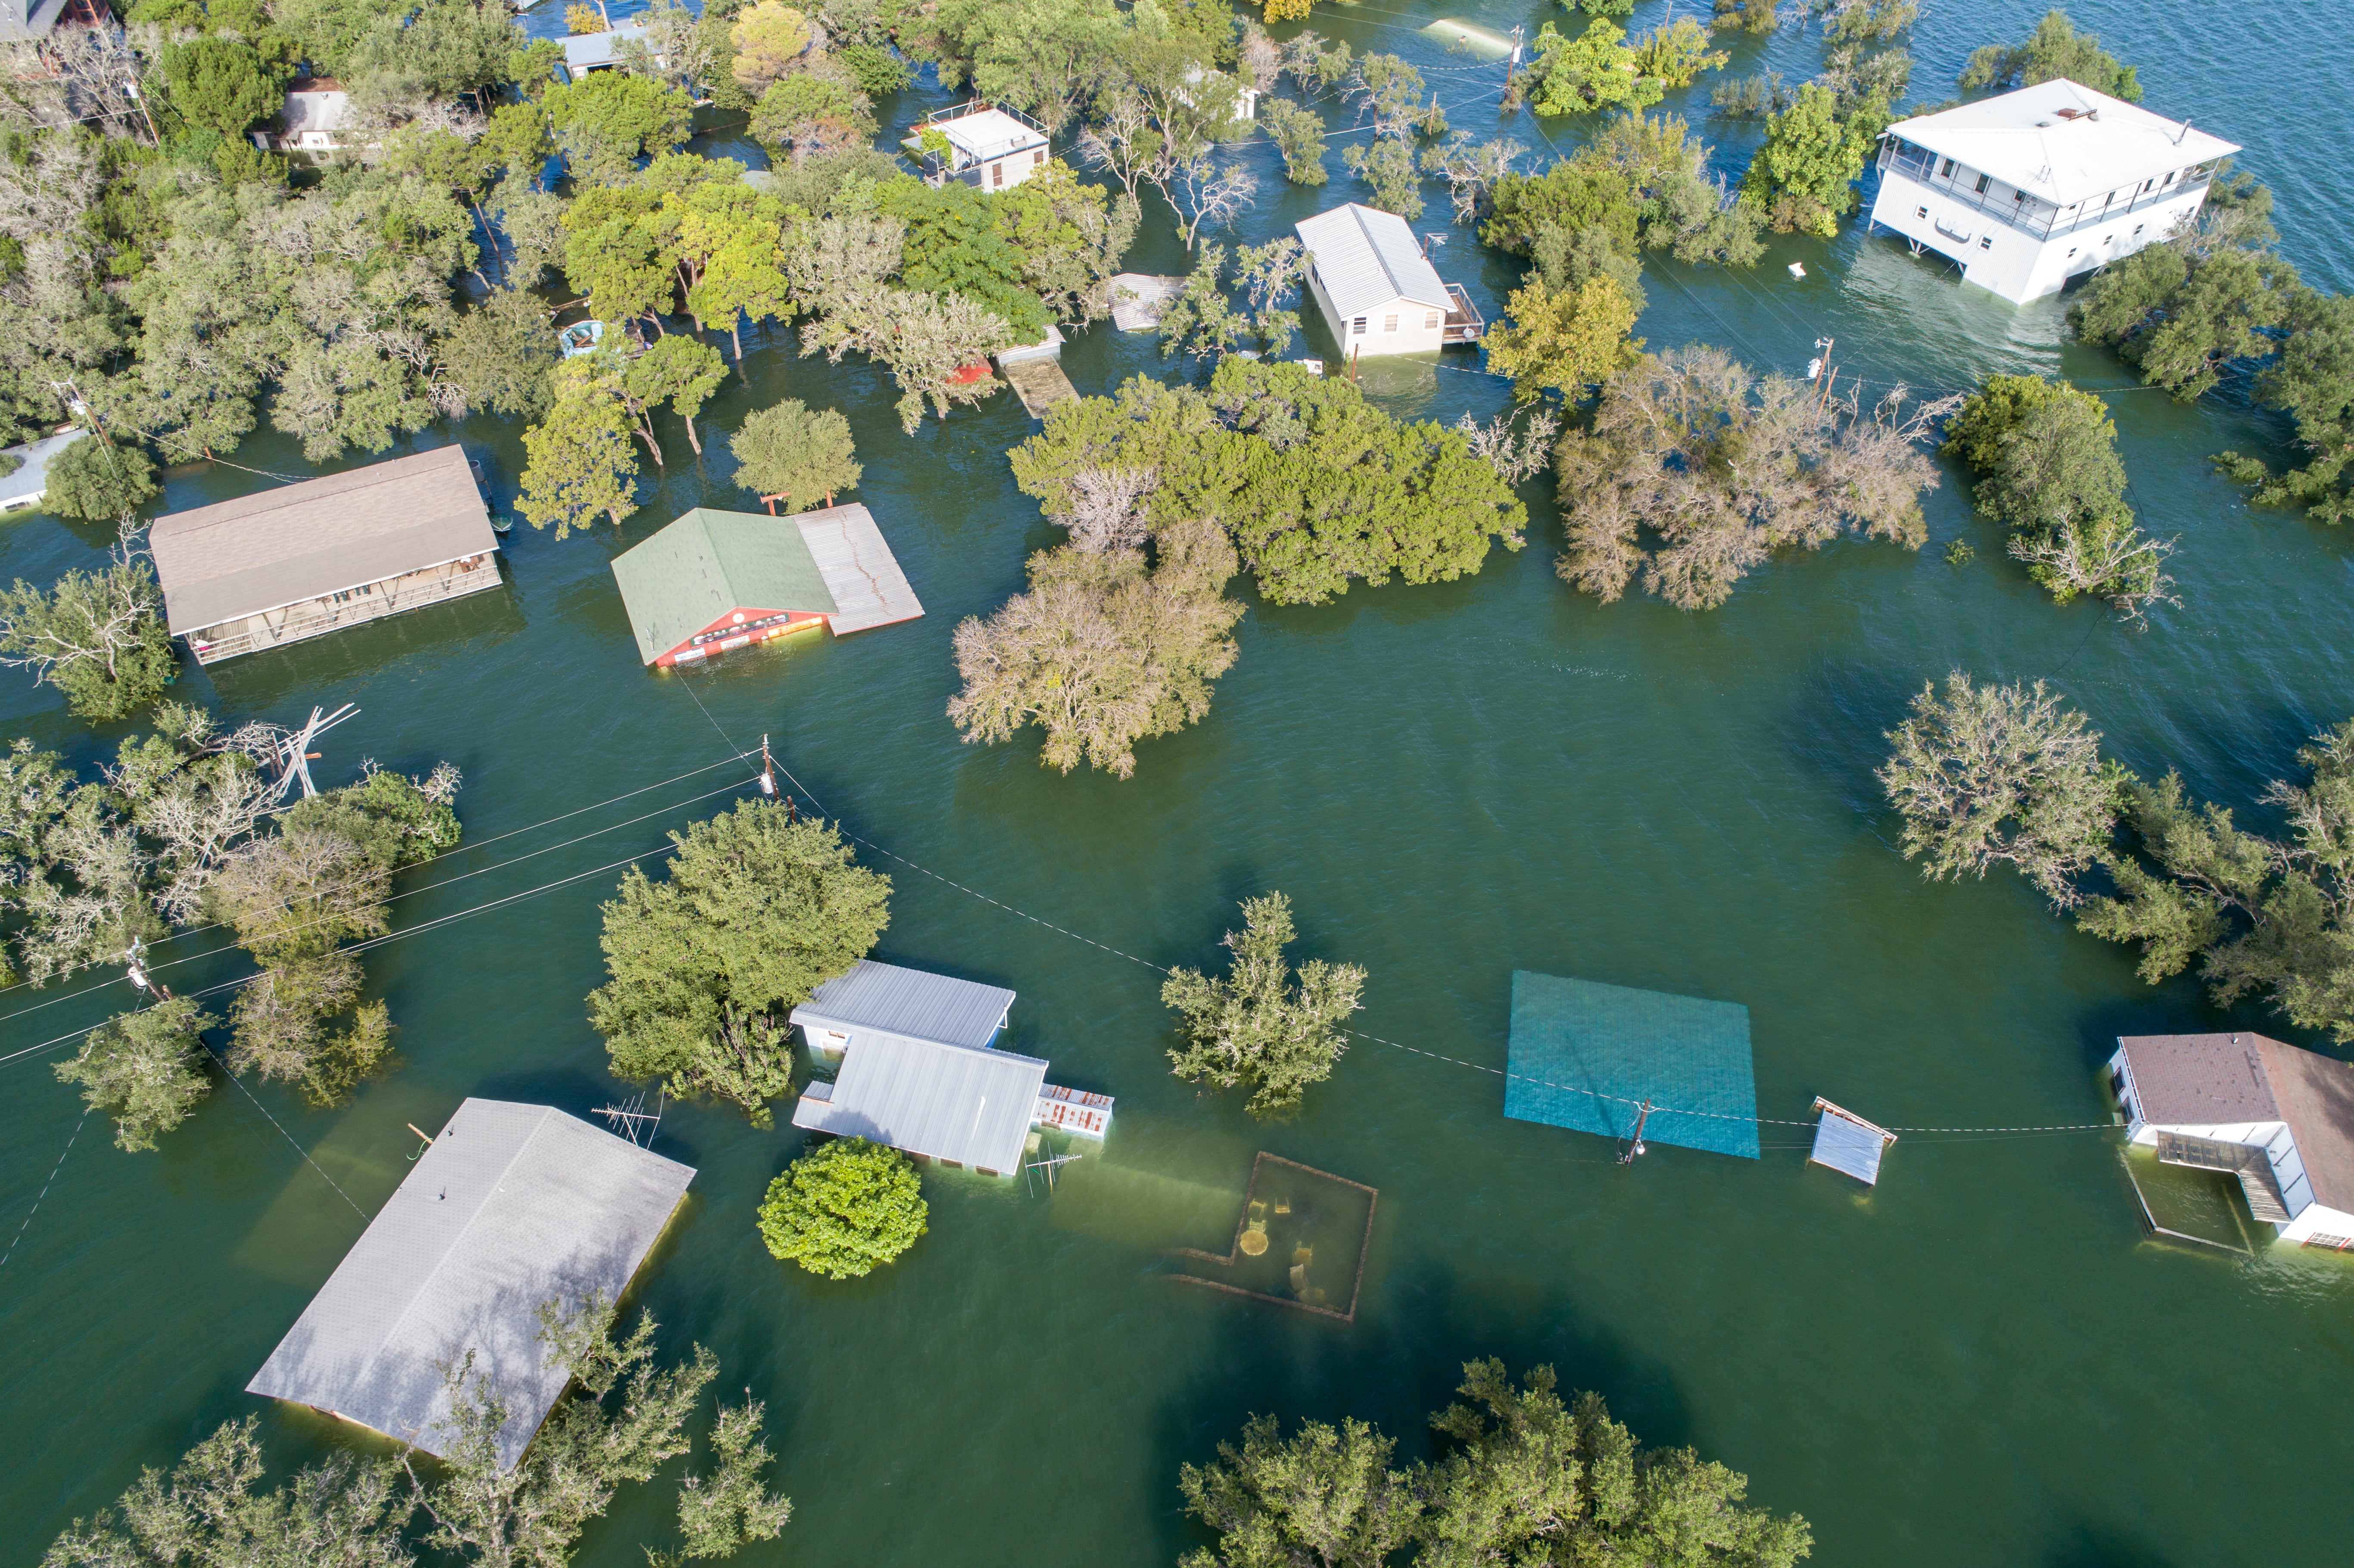 Floodplain living isn't a luxury. It's a reality we have to deal with. 